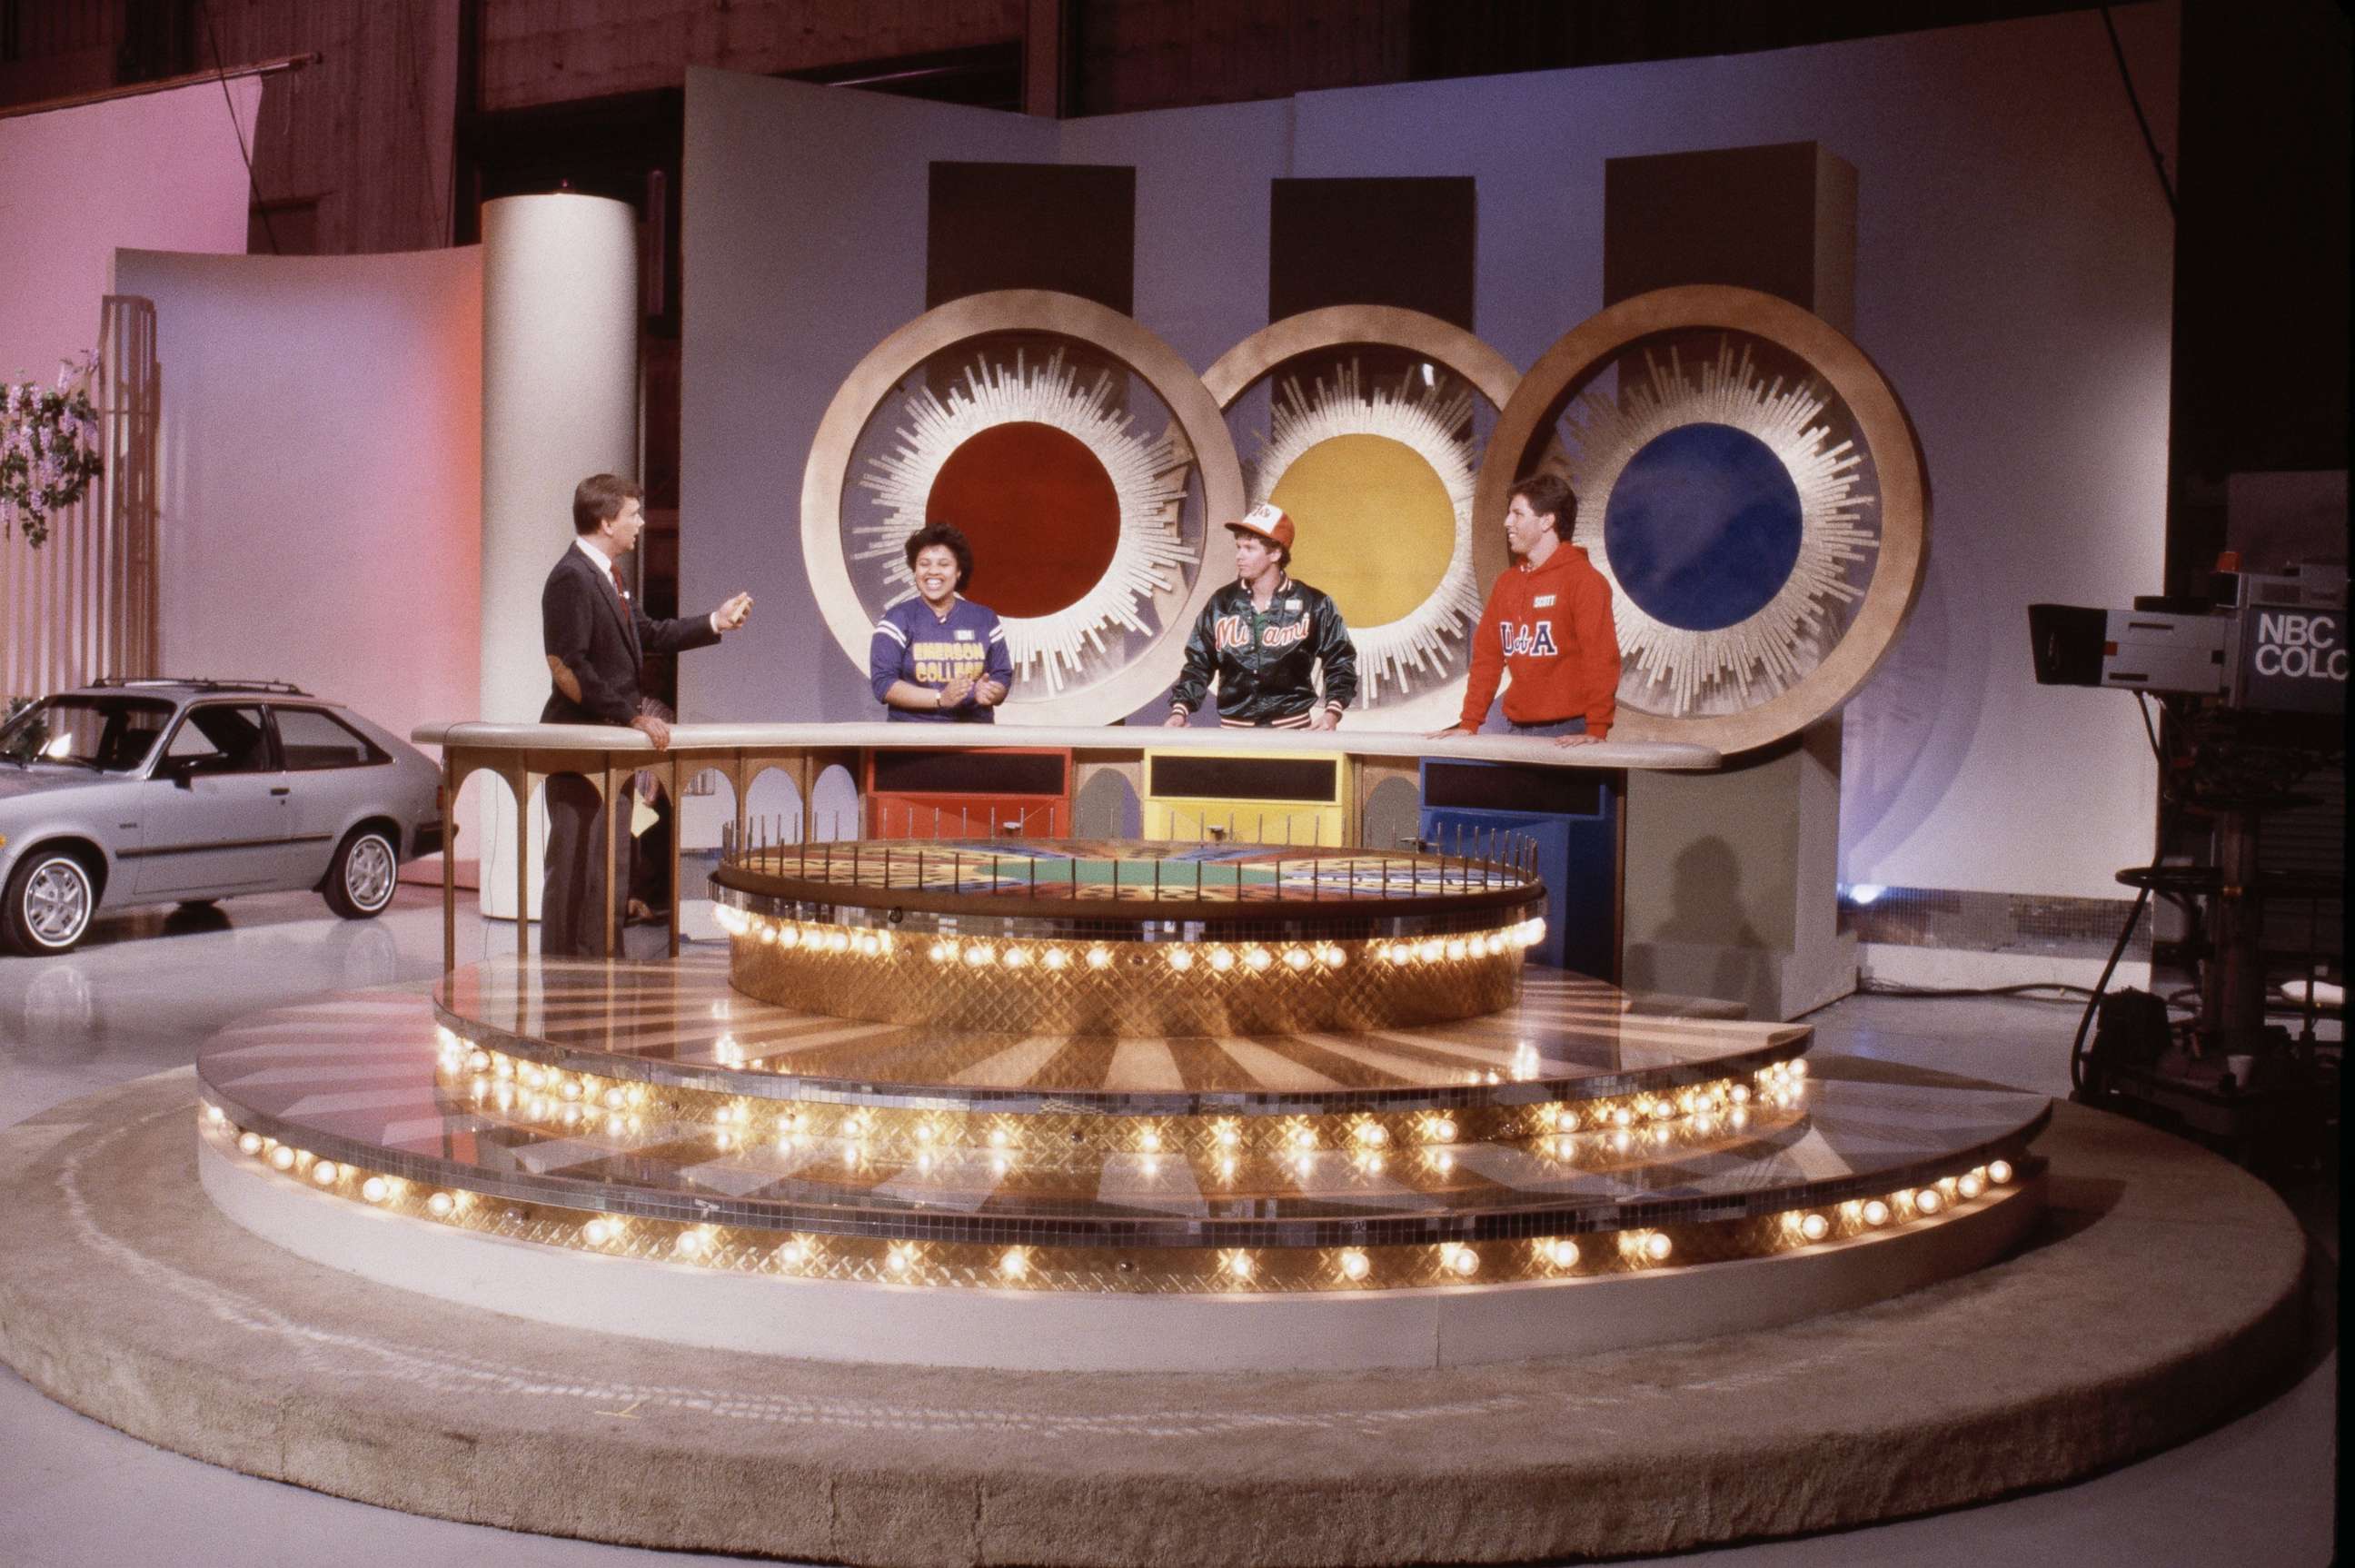 PHOTO: Pat Sajak with unknown contestants on the Wheel of Fortune in the 1980s.